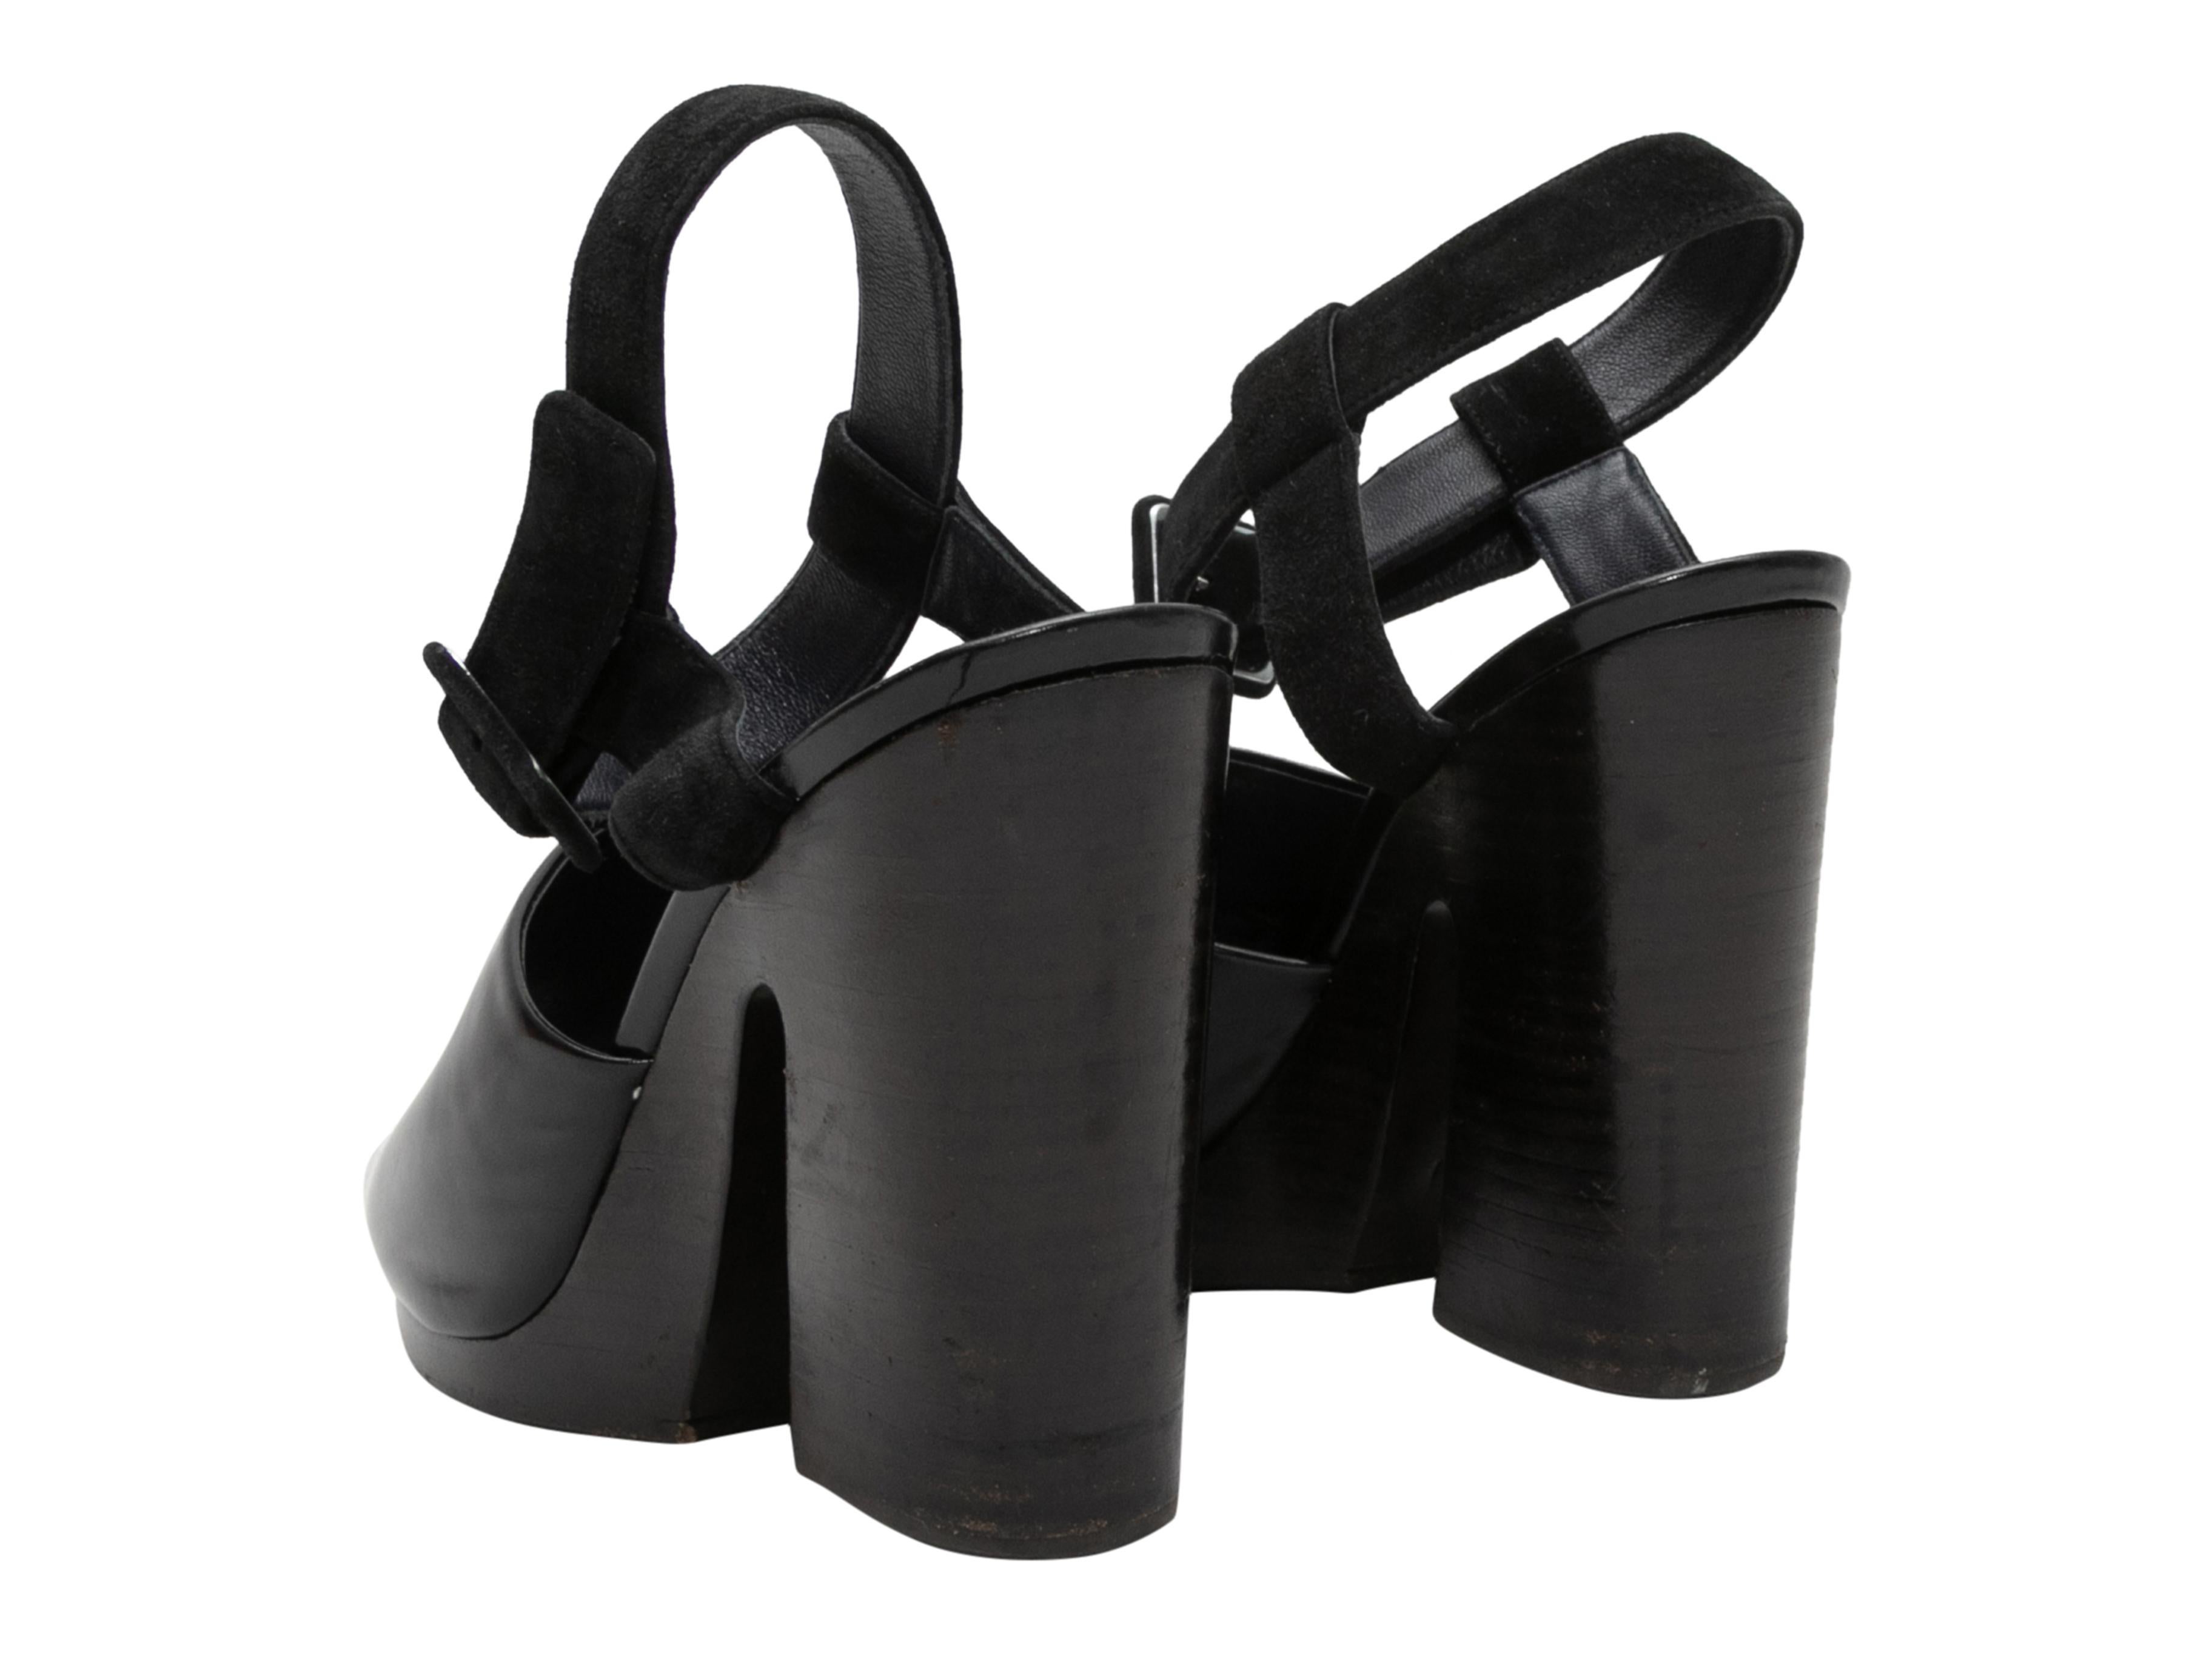 Black patent and suede platform sandals by Celine. Stacked heels. Buckle closures at ankle straps. 0.25